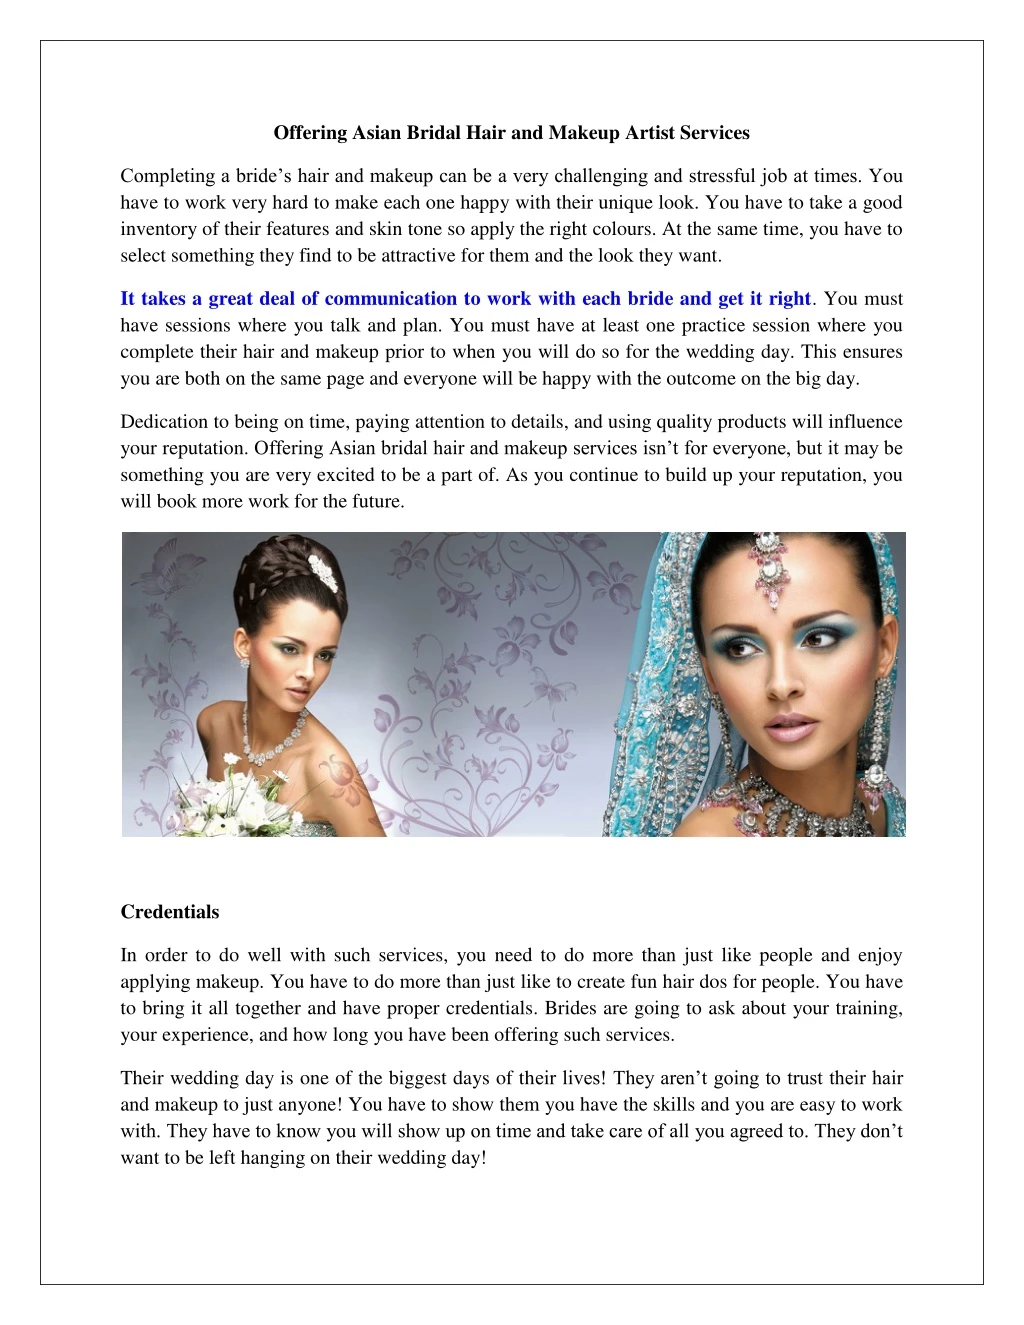 offering asian bridal hair and makeup artist